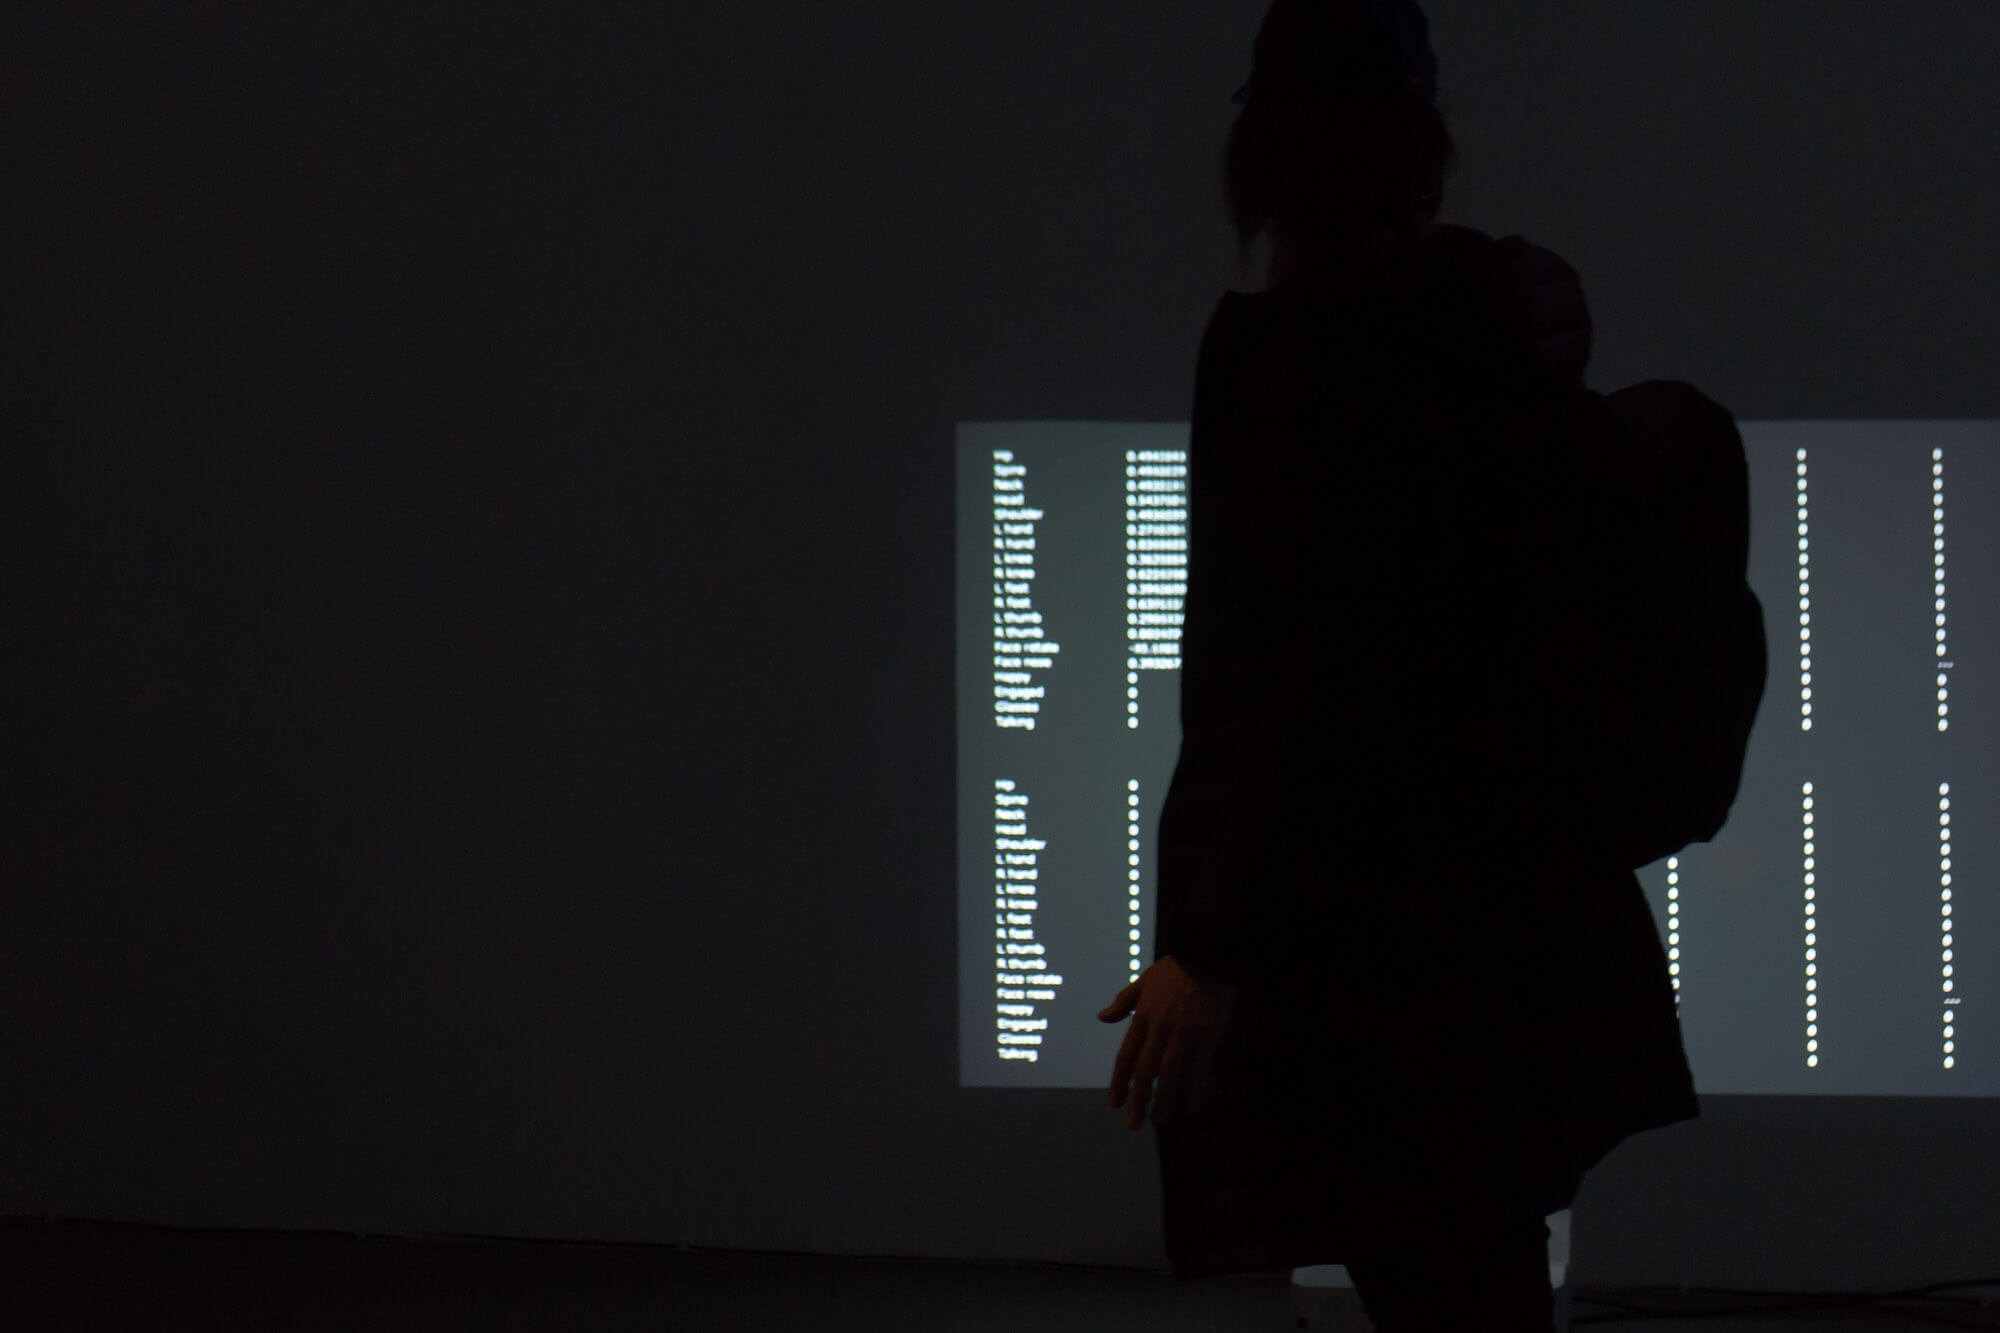 A person in a dark room observing the numbers projected on a wall